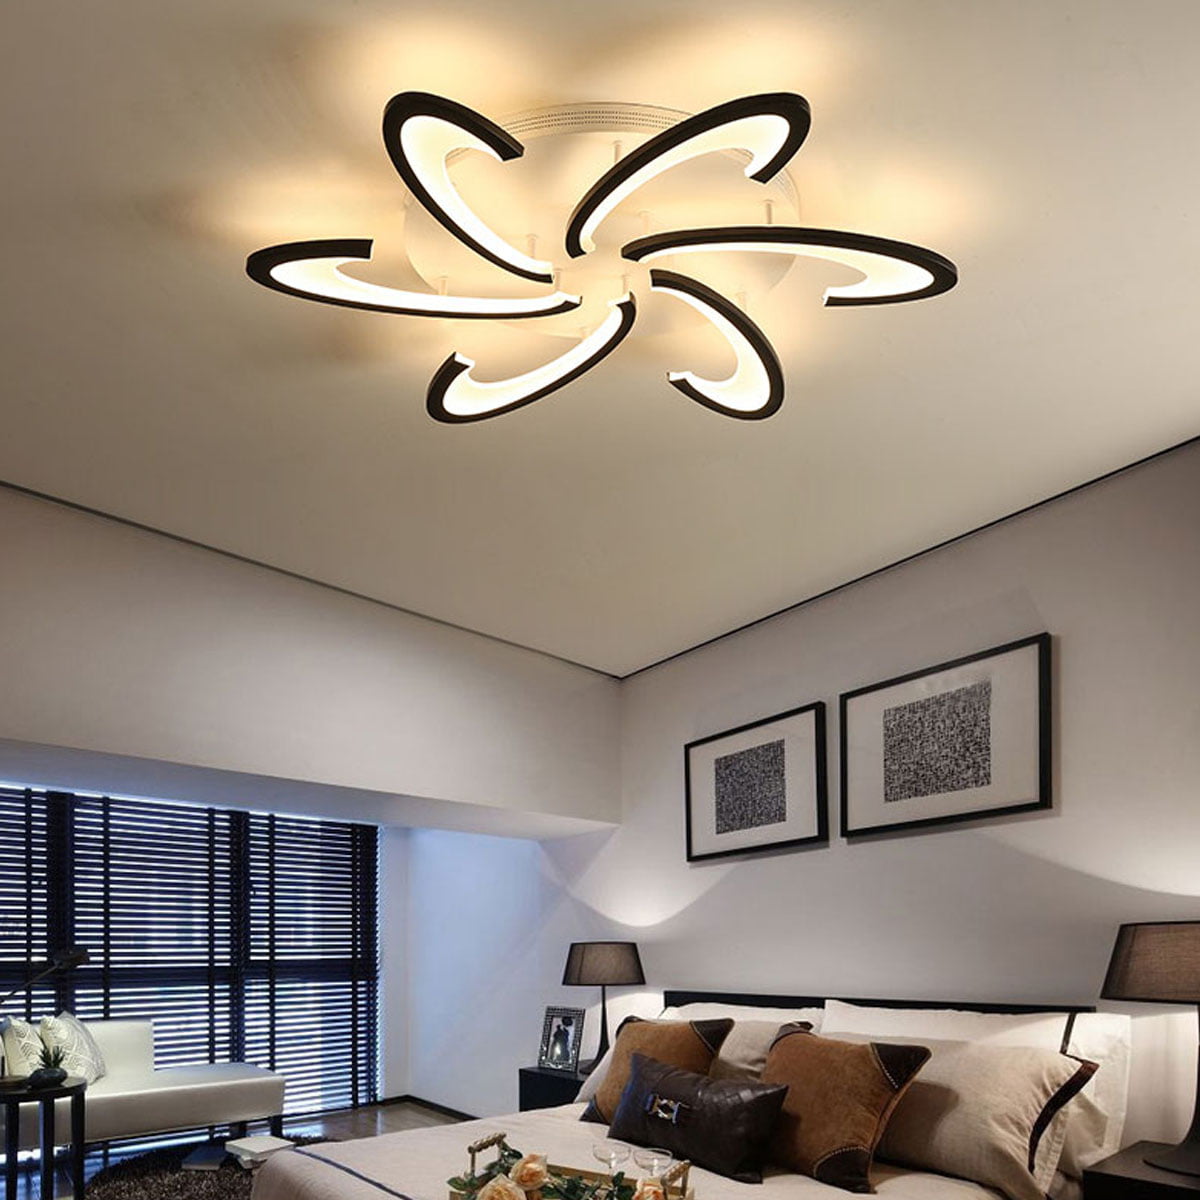 LED RGB Ceiling Light Living Room Kitchen Decor Wall Lamp Creative Modern Style